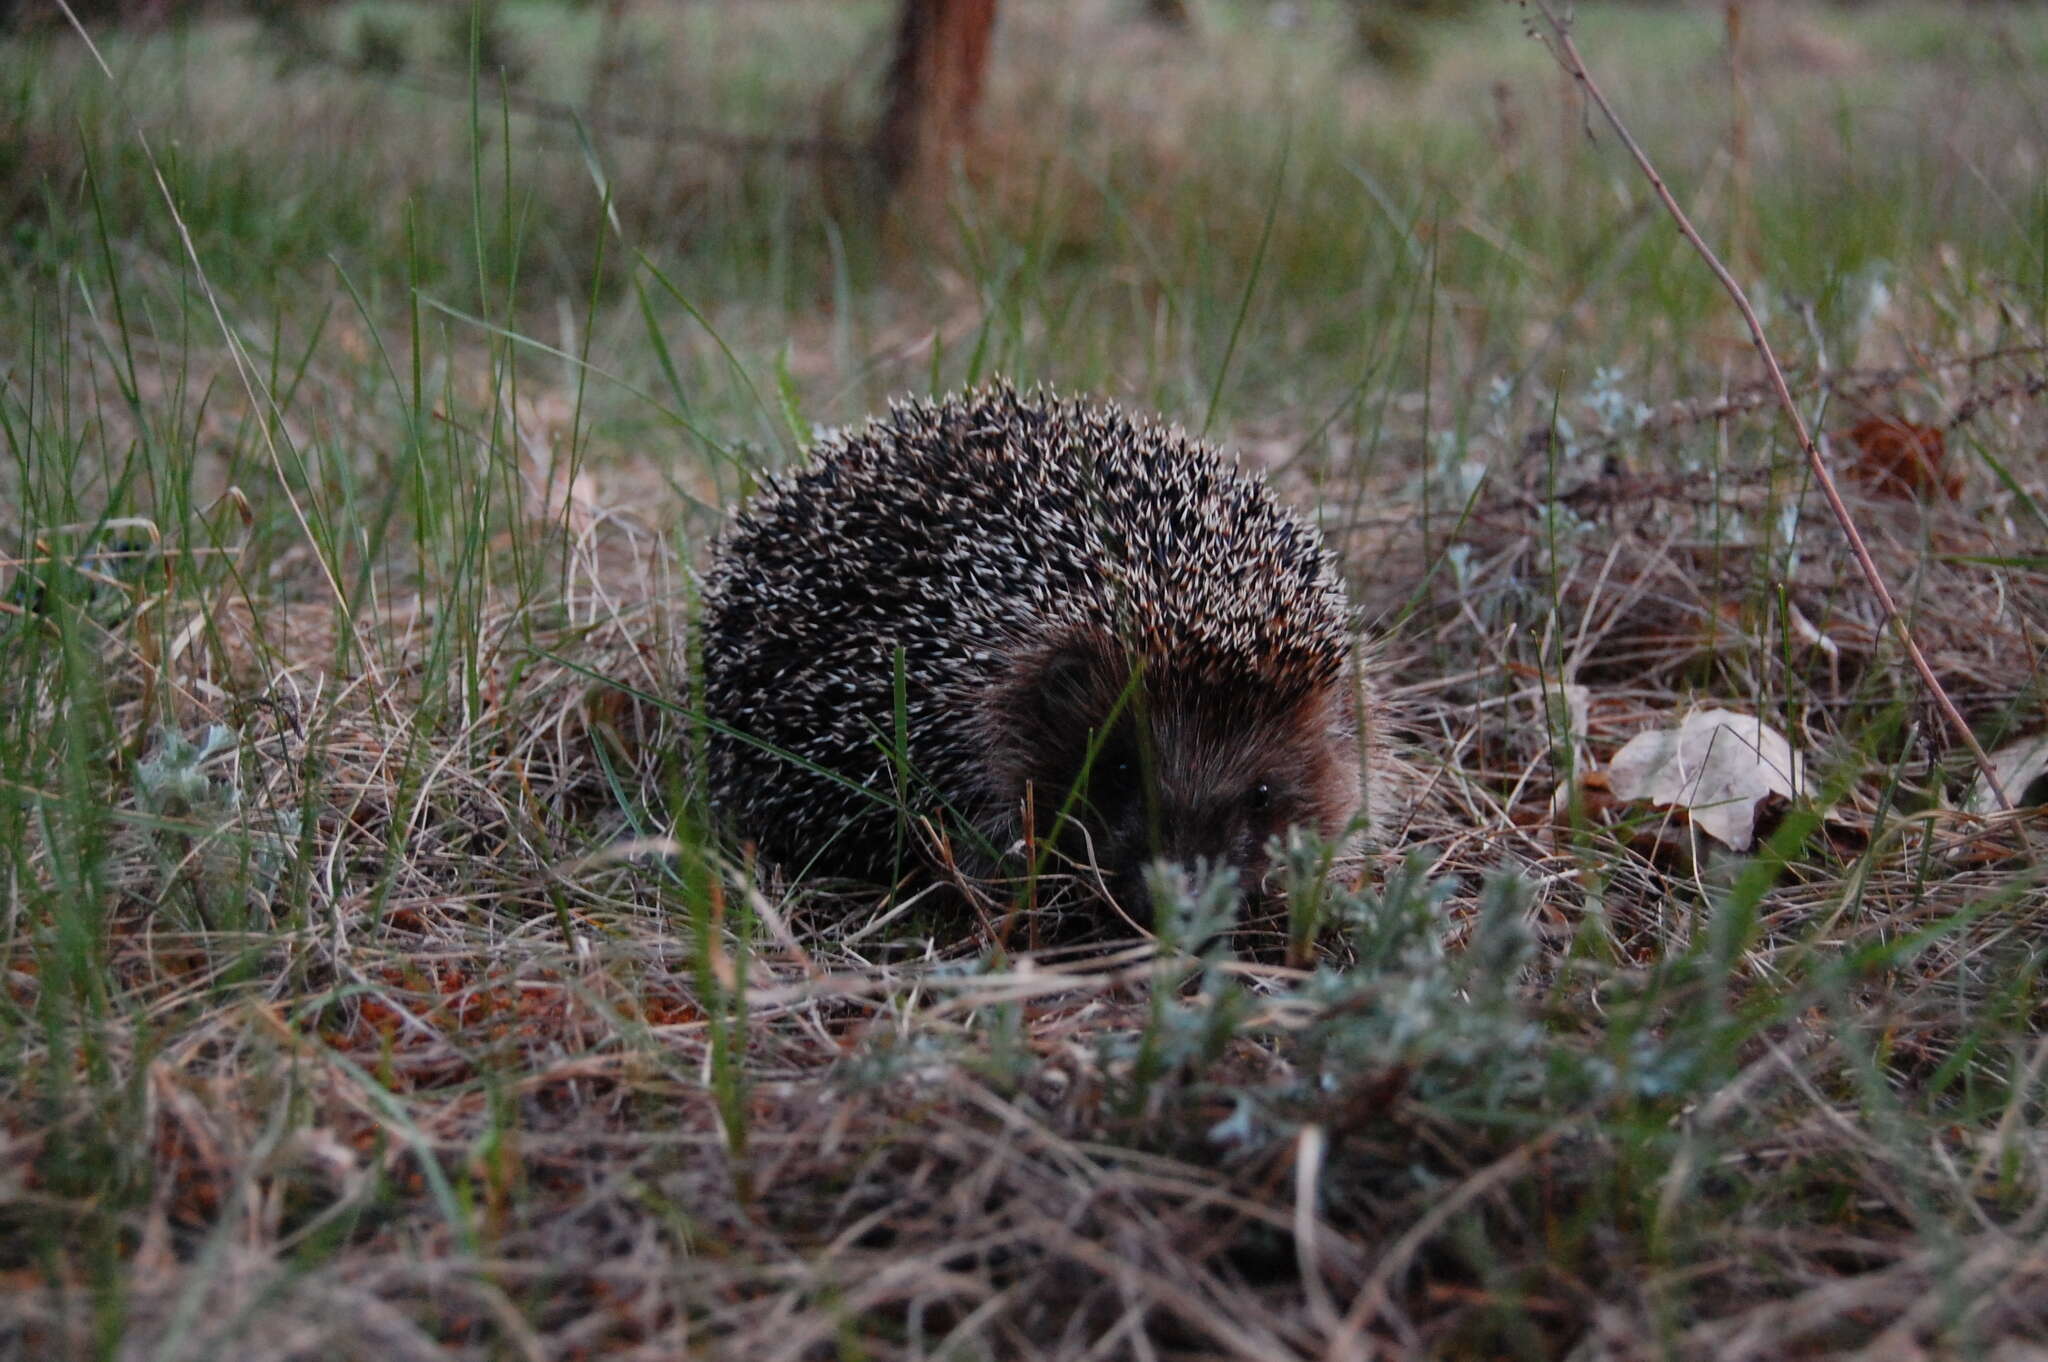 Image of Northern White-Breasted Hedgehog